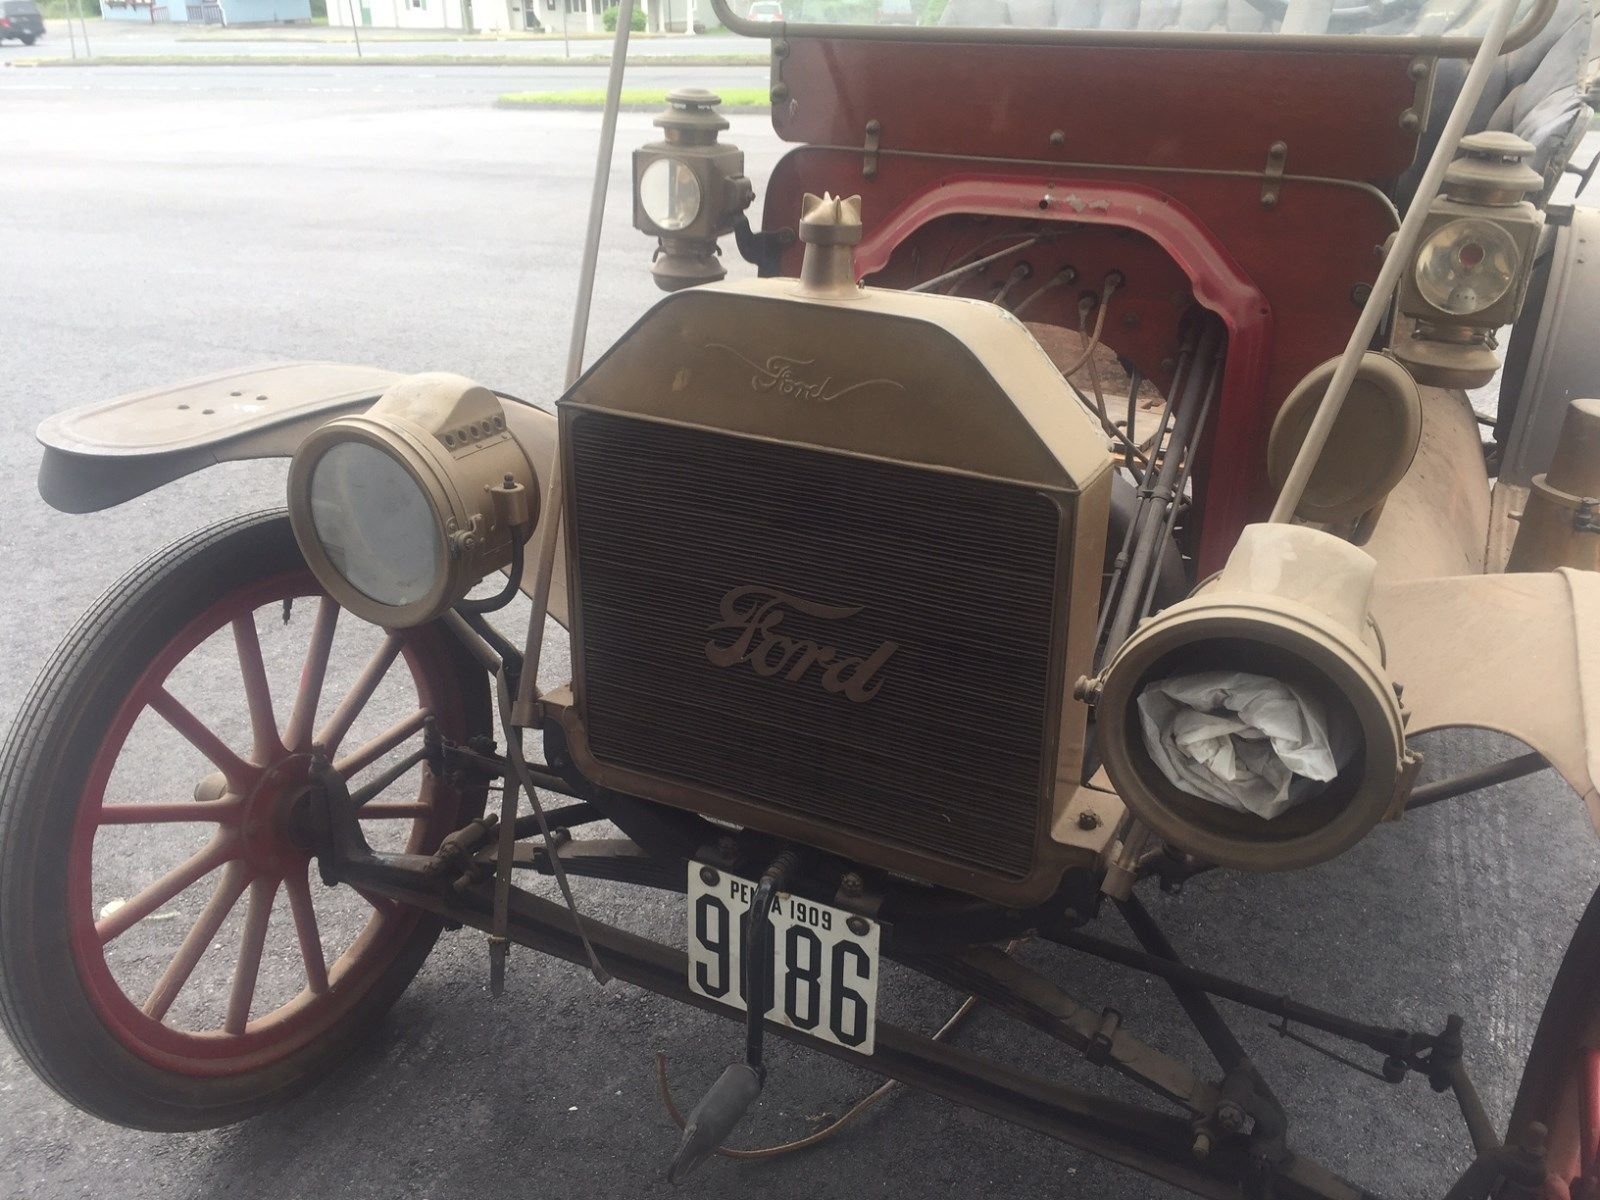 Ford model T